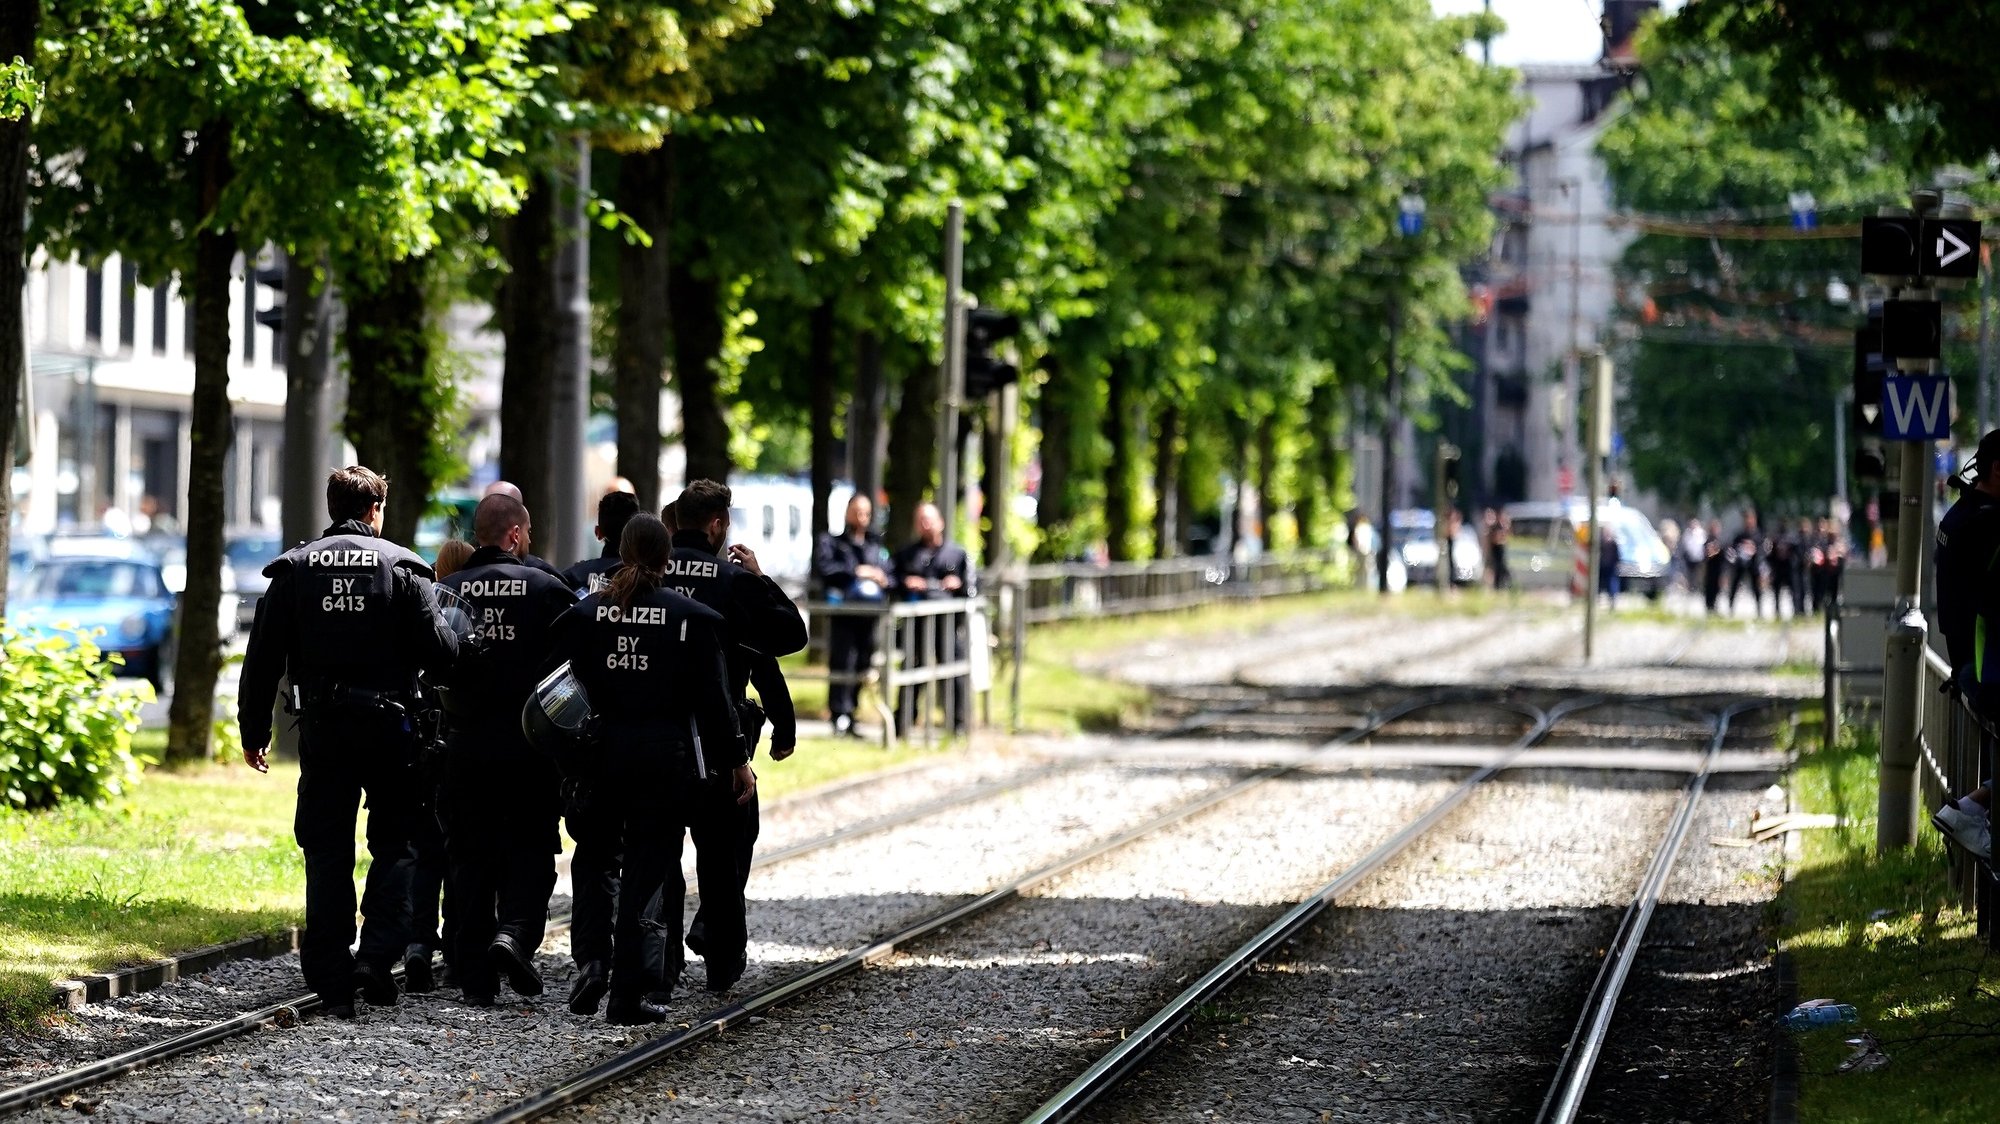 epa10033404 Police officers patrol during a demonstration related to the G7 Summit in Munich, Germany, 25 June 2022. Germany is hosting the G7 summit at Elmau Castle near Garmisch-Partenkirchen from 26 to 28 June 2022.  EPA/CLEMENS BILAN